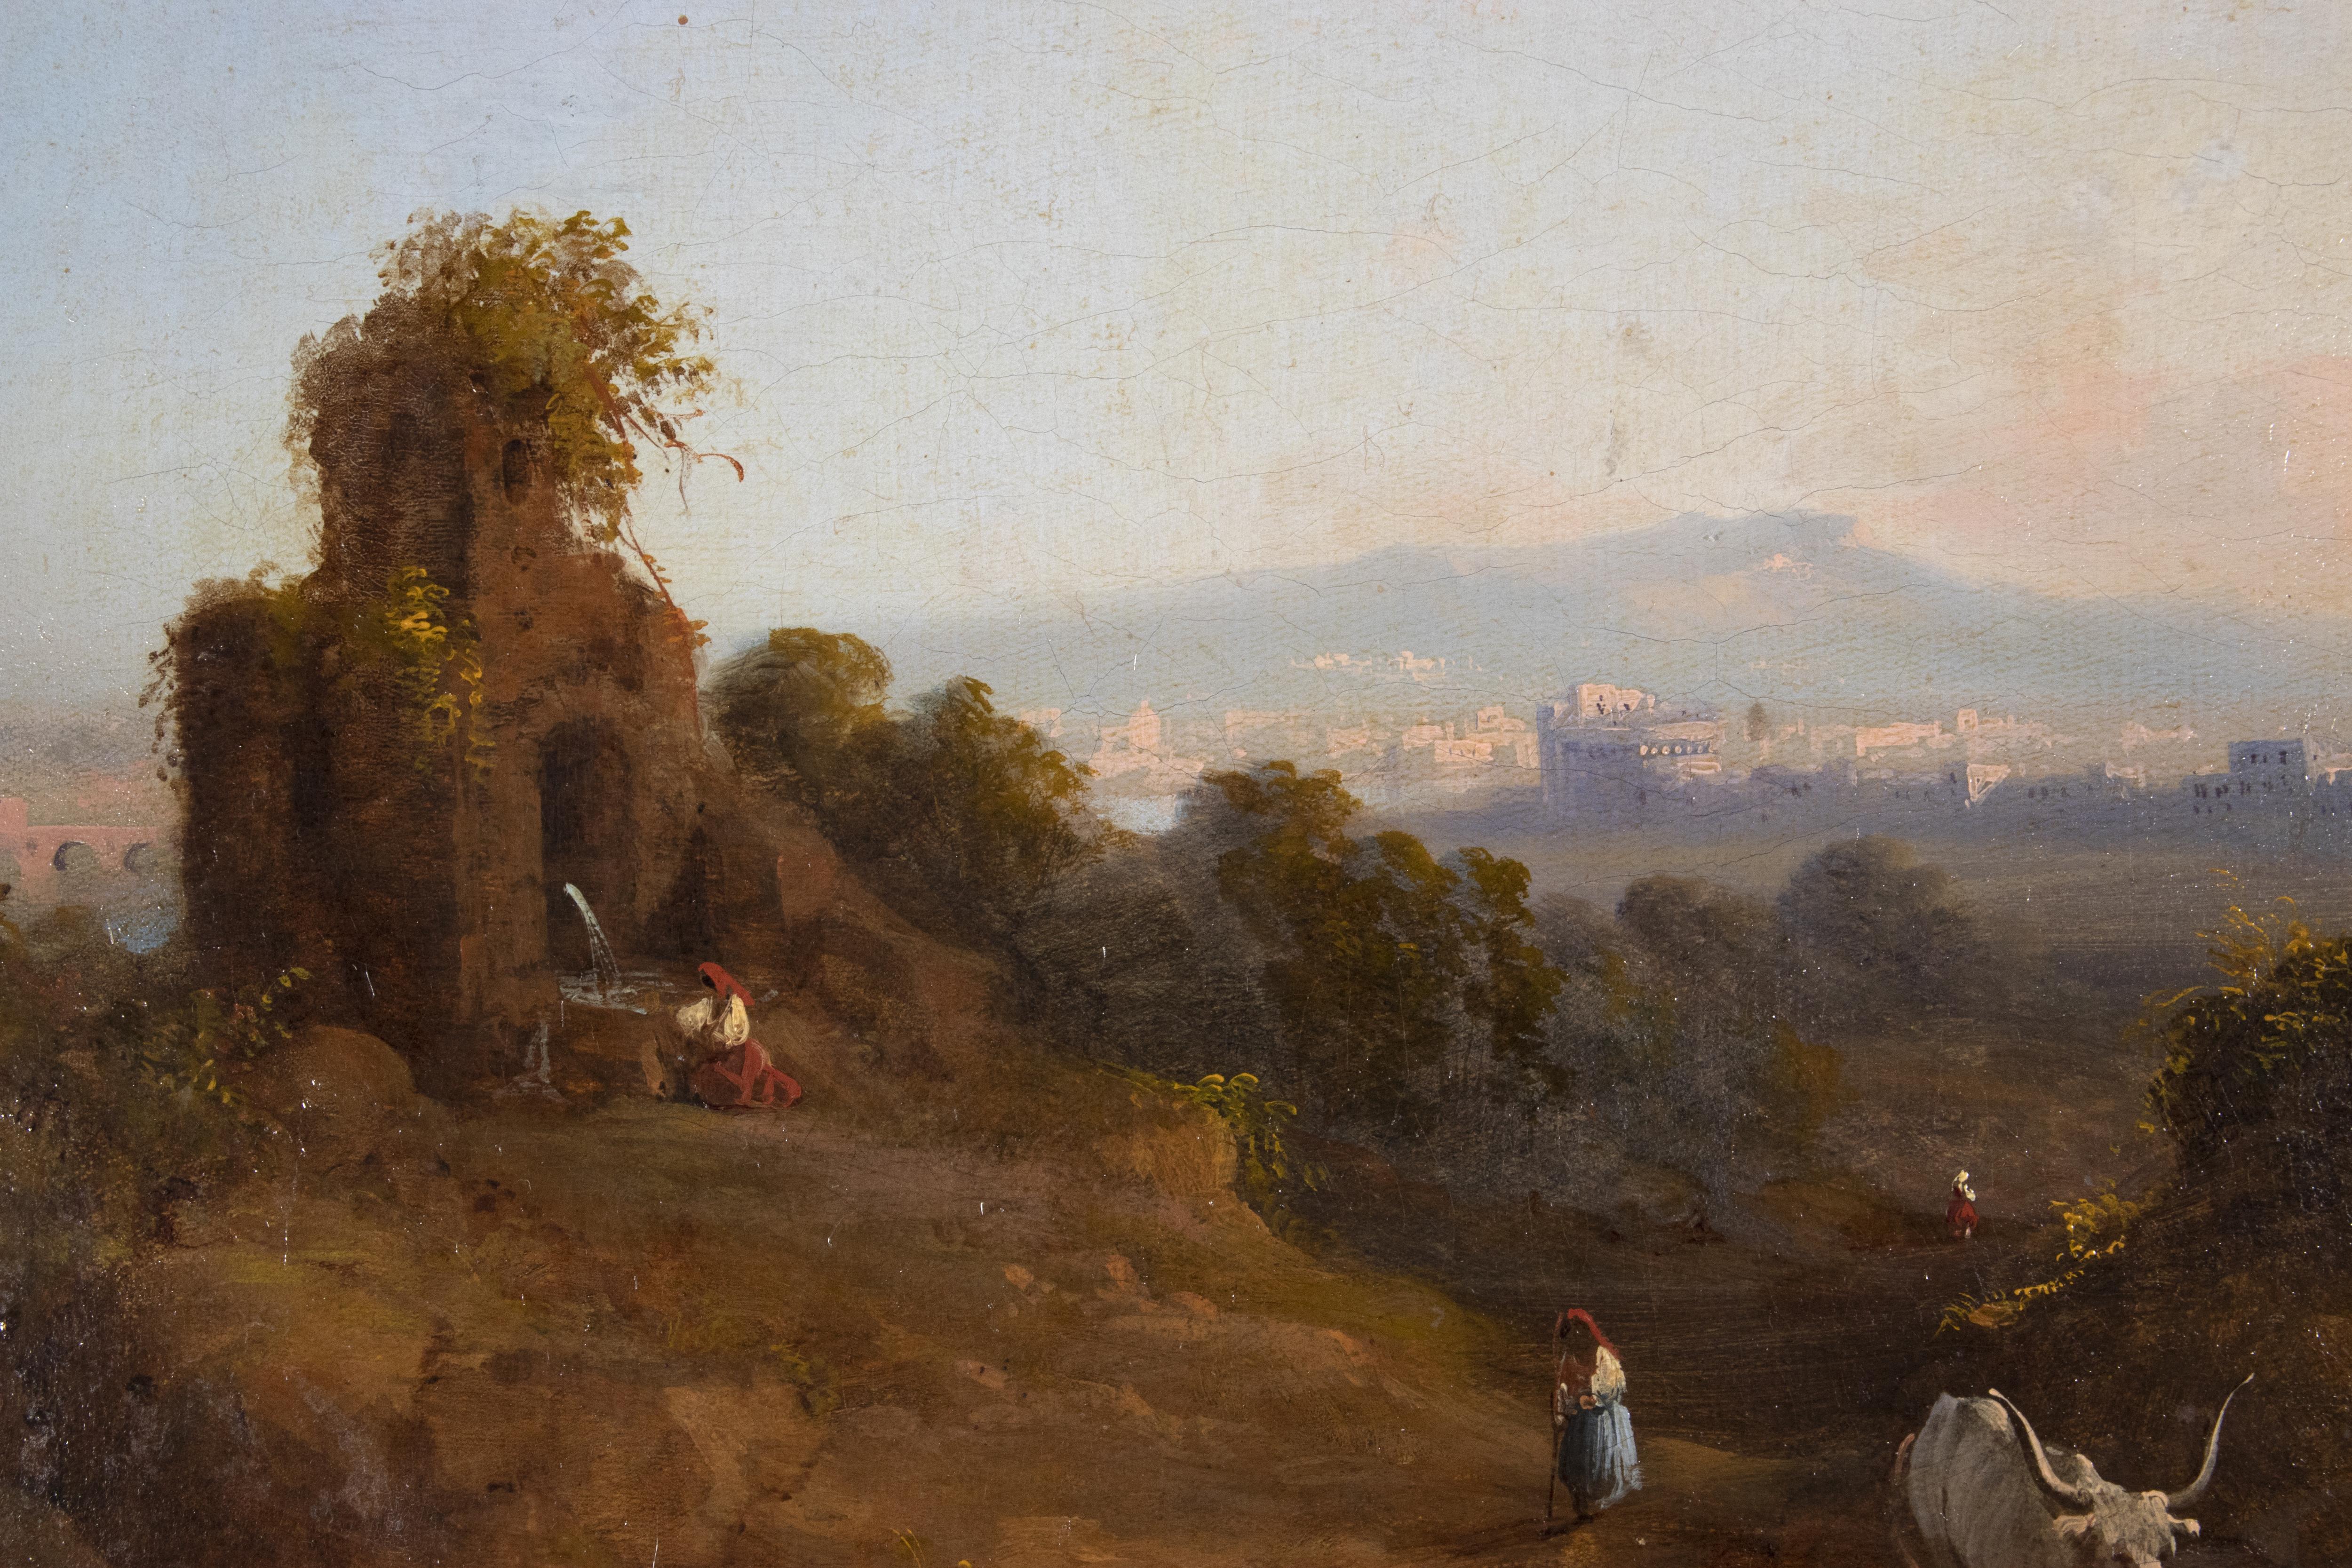 Pair of Landscapes with Views of Ancient Rome - Oil on Canvas - Mid 19th century - Gray Figurative Painting by Unknown